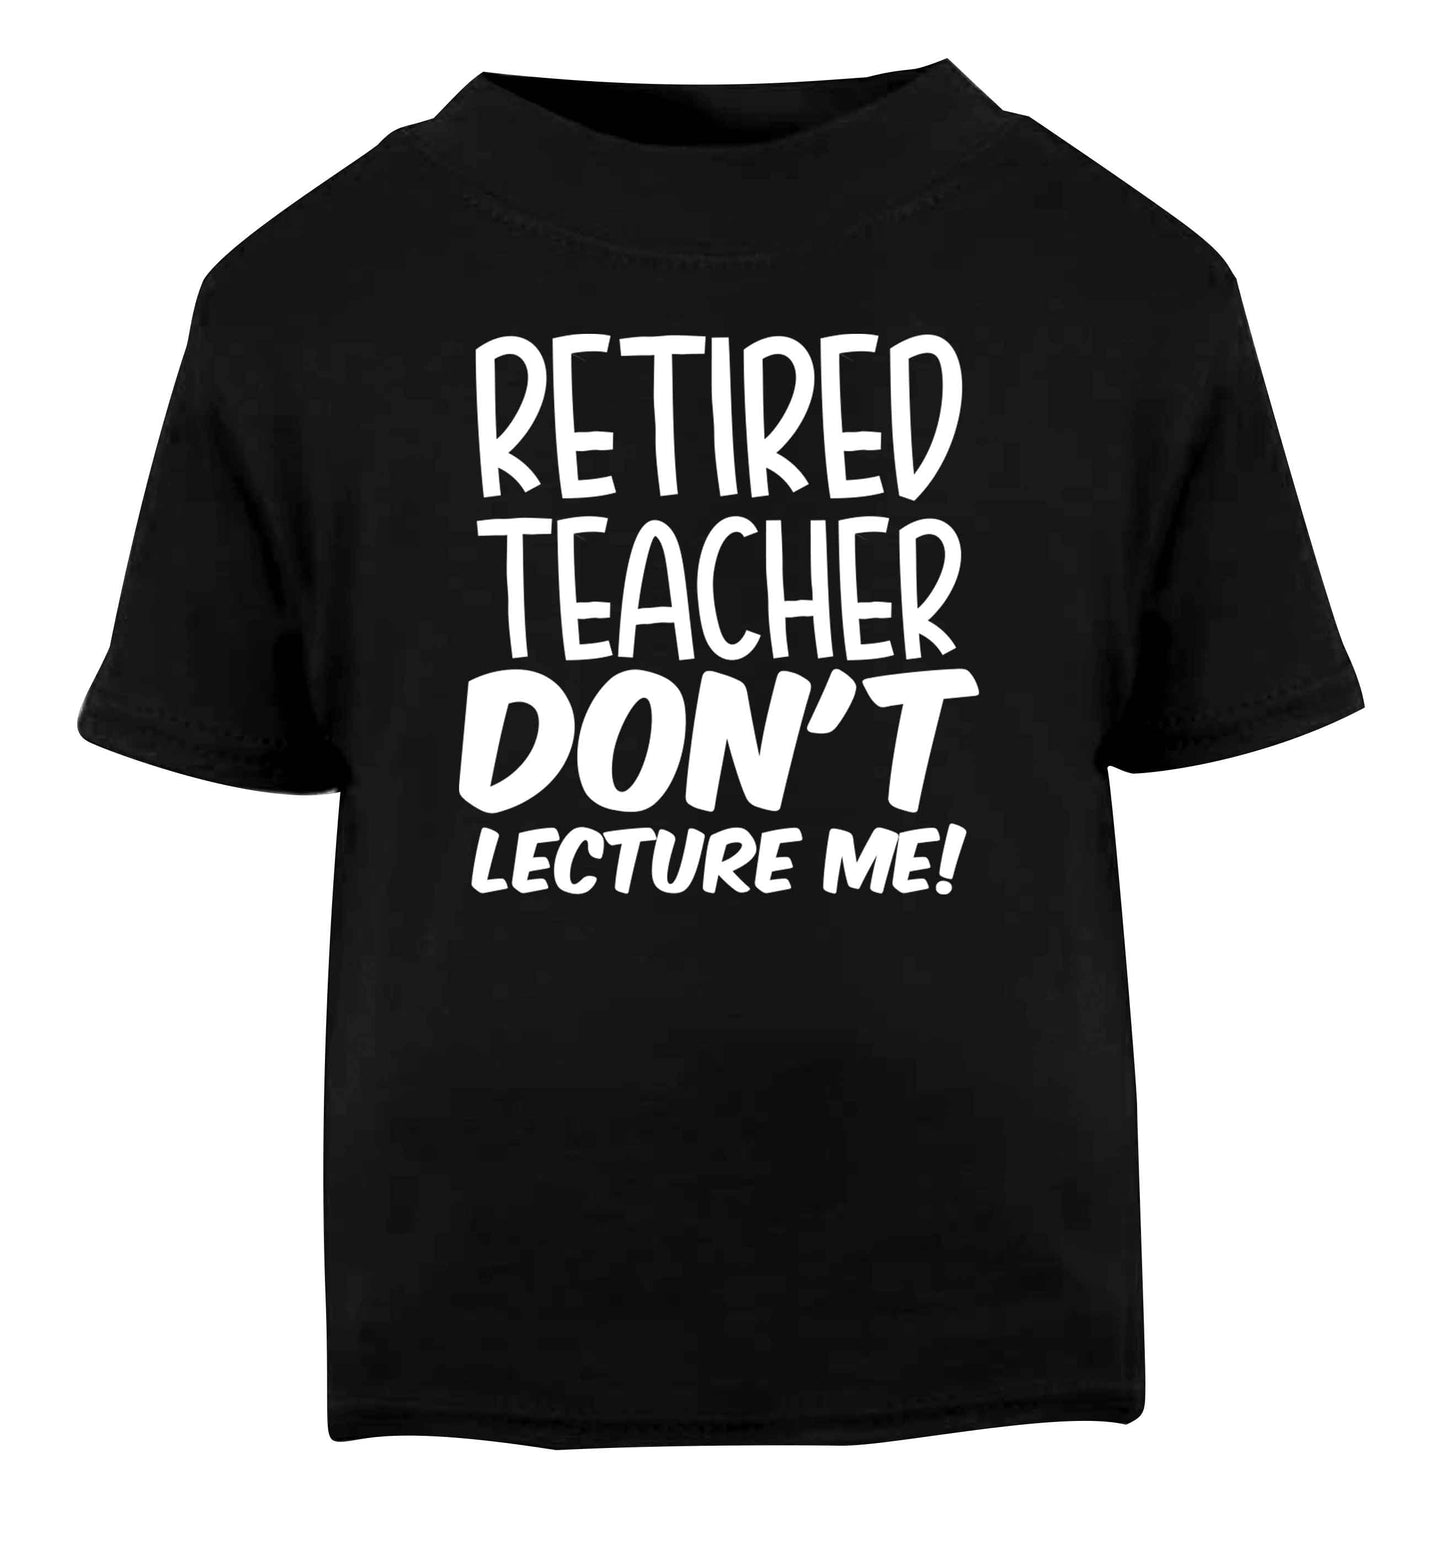 Retired teacher don't lecture me! Black Baby Toddler Tshirt 2 years